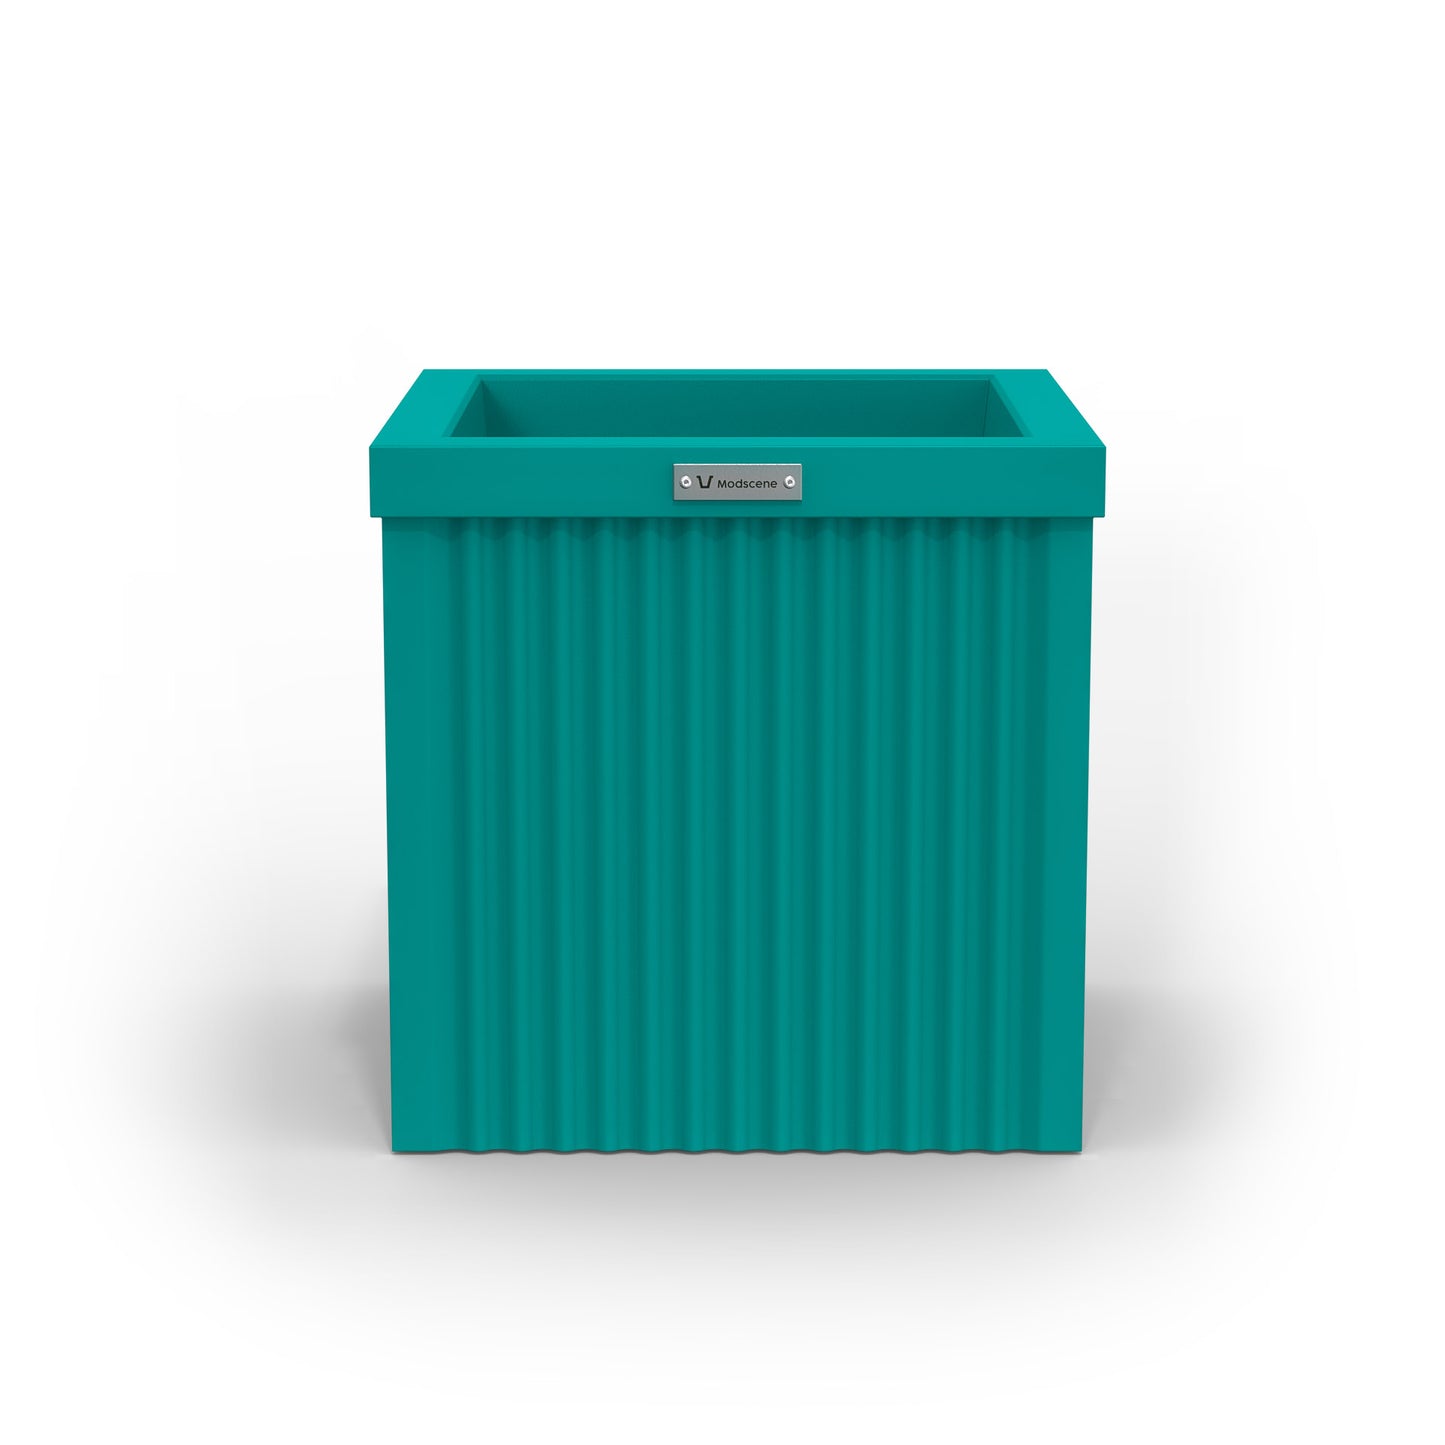 A corrugated square planter pot. The pot planter is teal in colour.